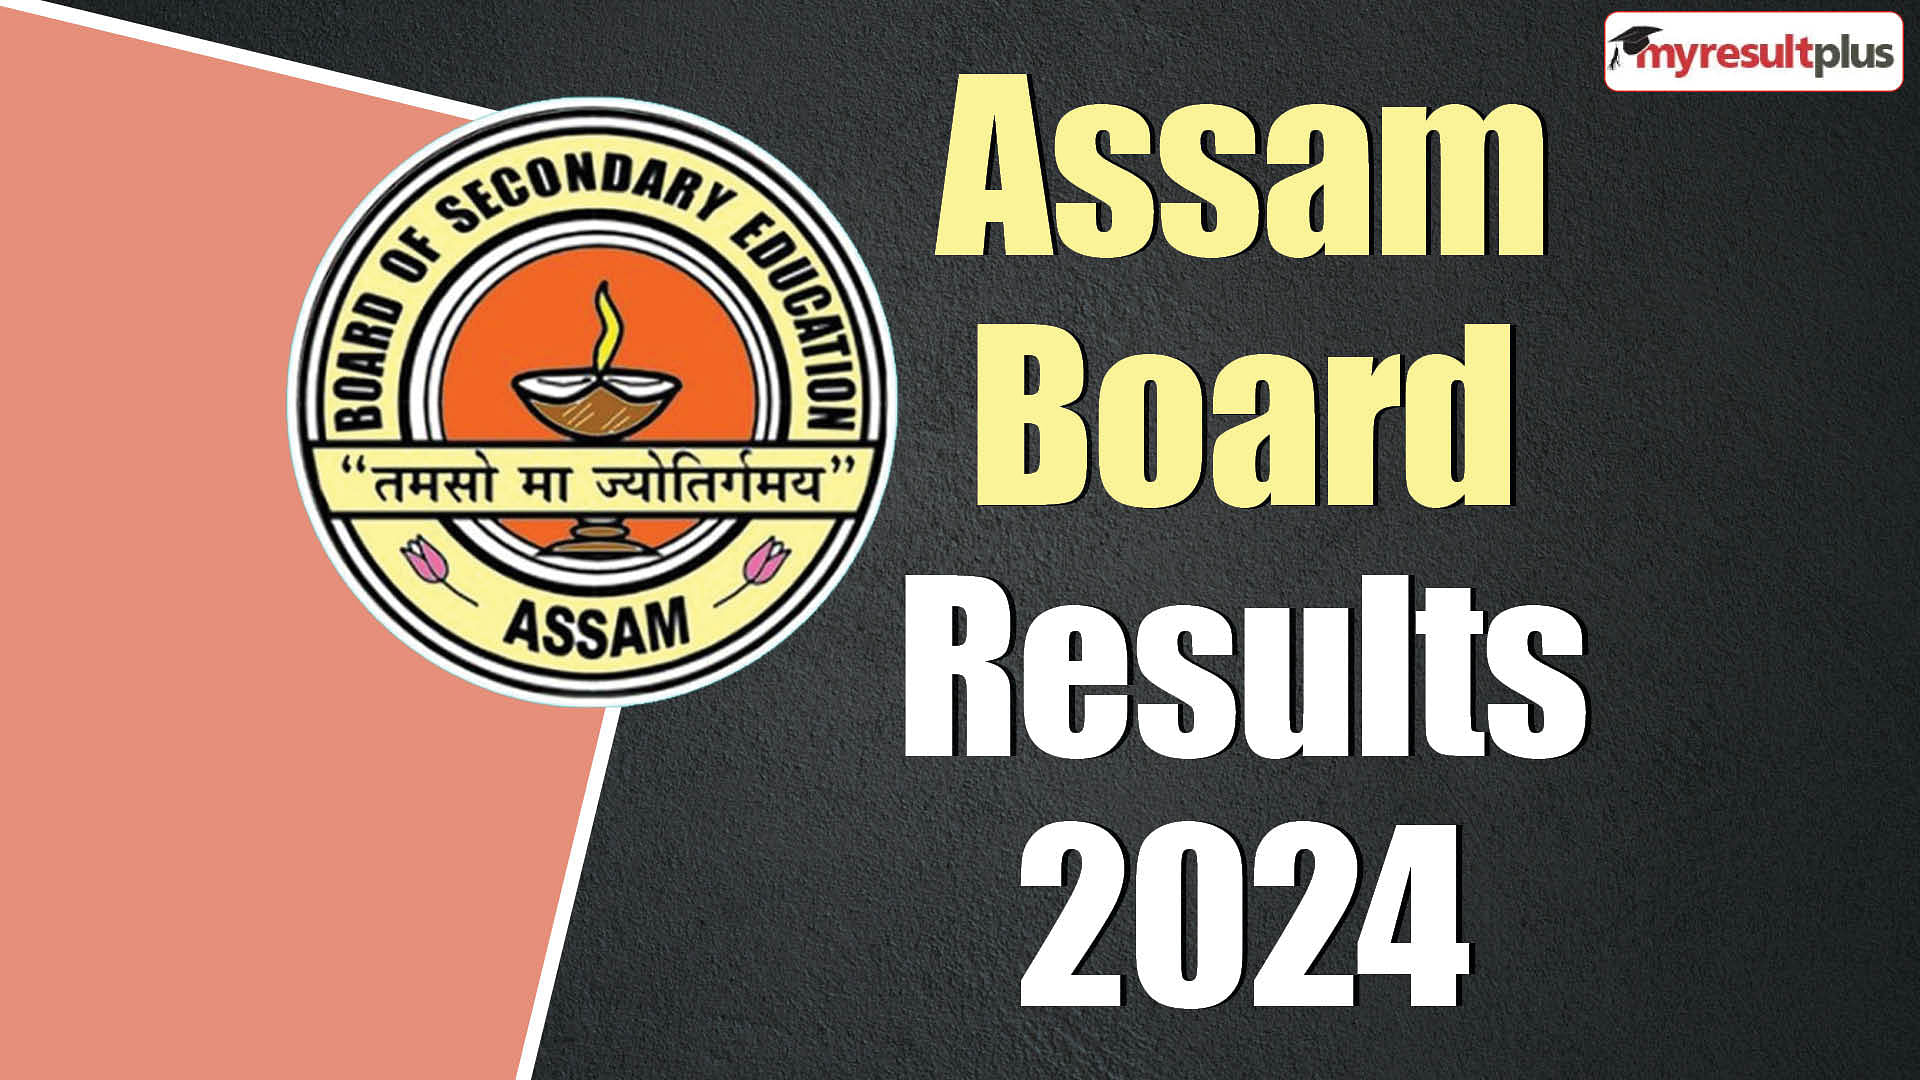 Assam Board HS Results 2024 expected soon, Read about last year's analysis here